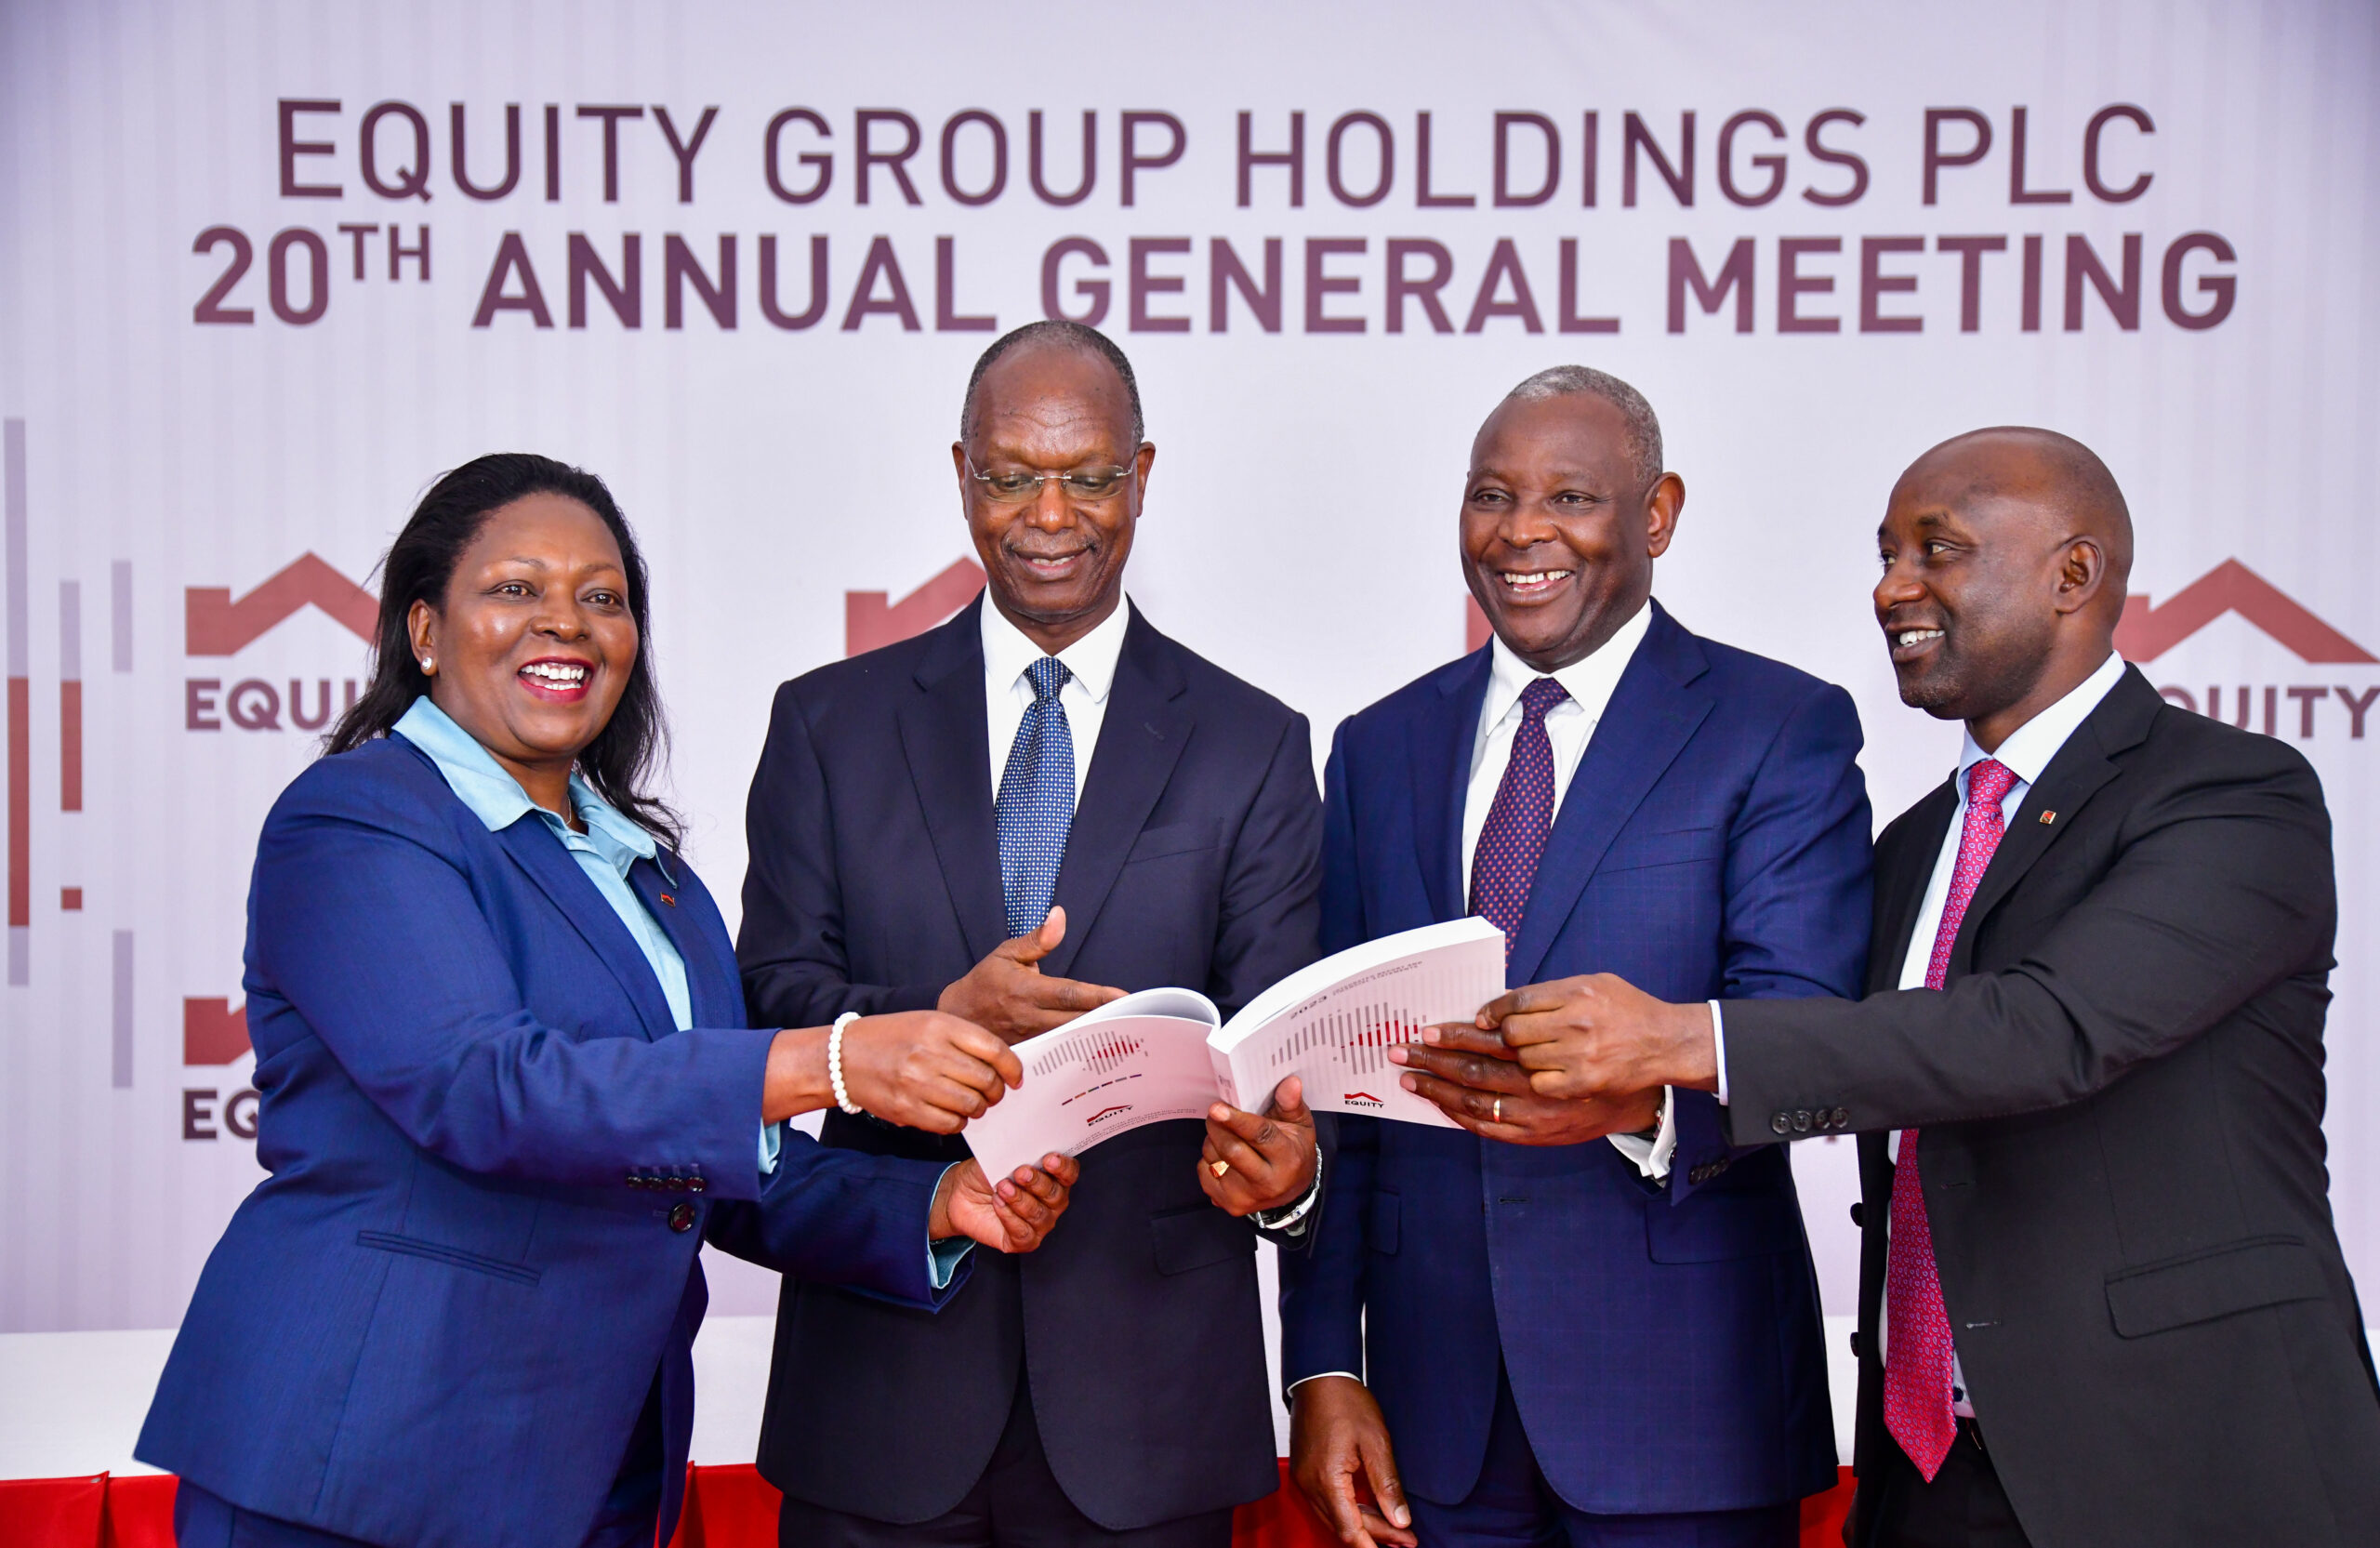 EQUITY GROUP HOLDS 20TH ANNUAL GENERAL MEETING